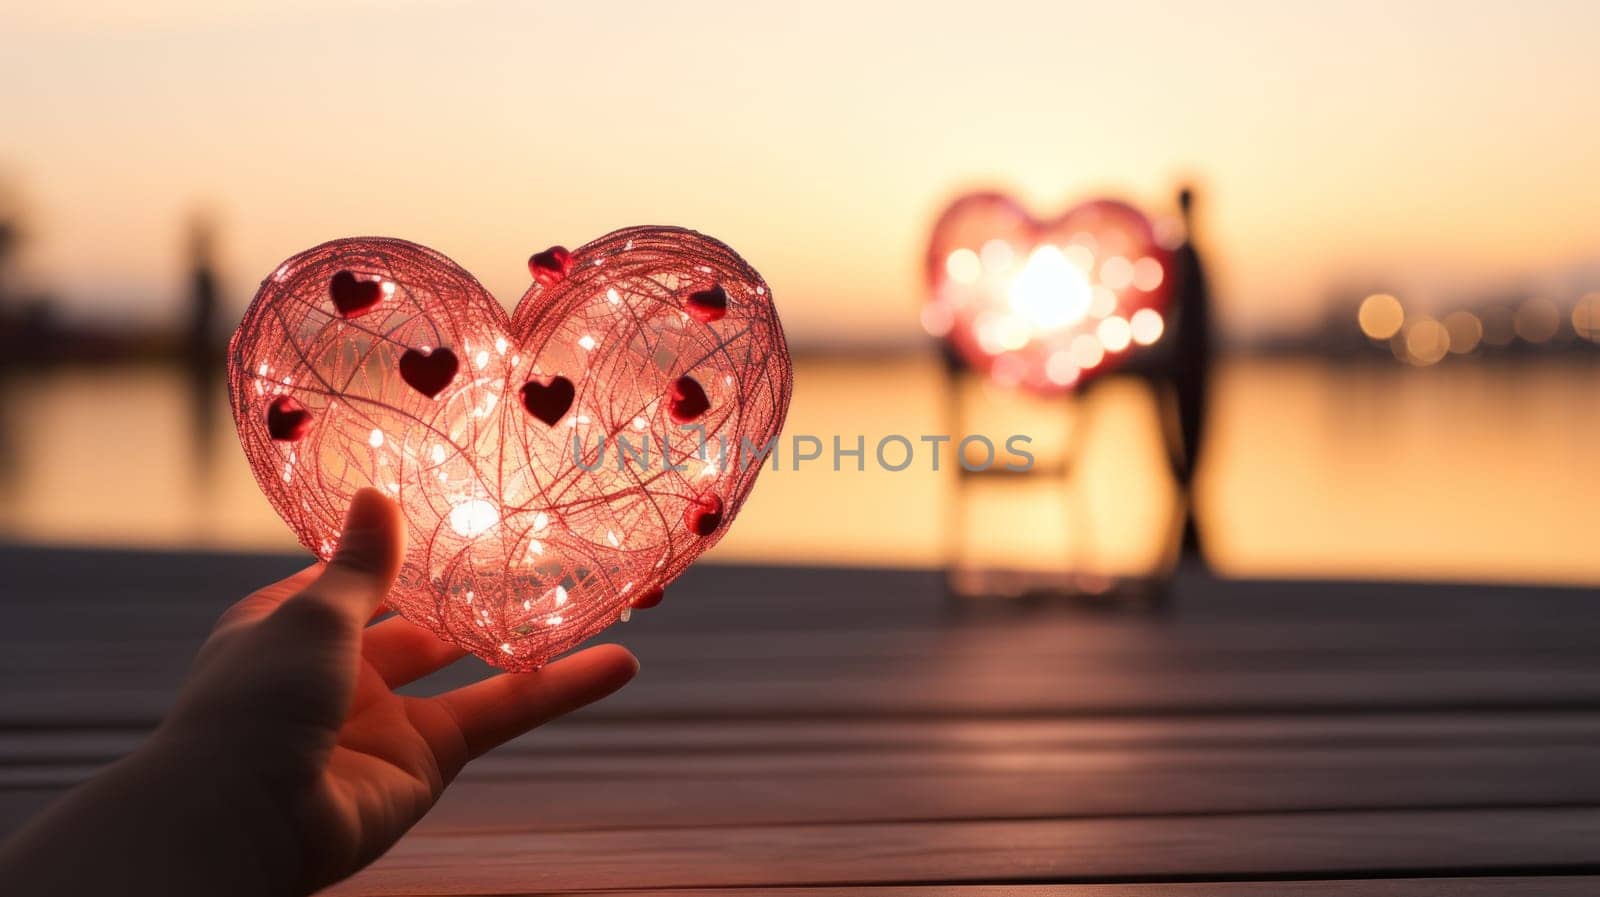 A person holding a heart shaped lighted object on the dock, AI by starush